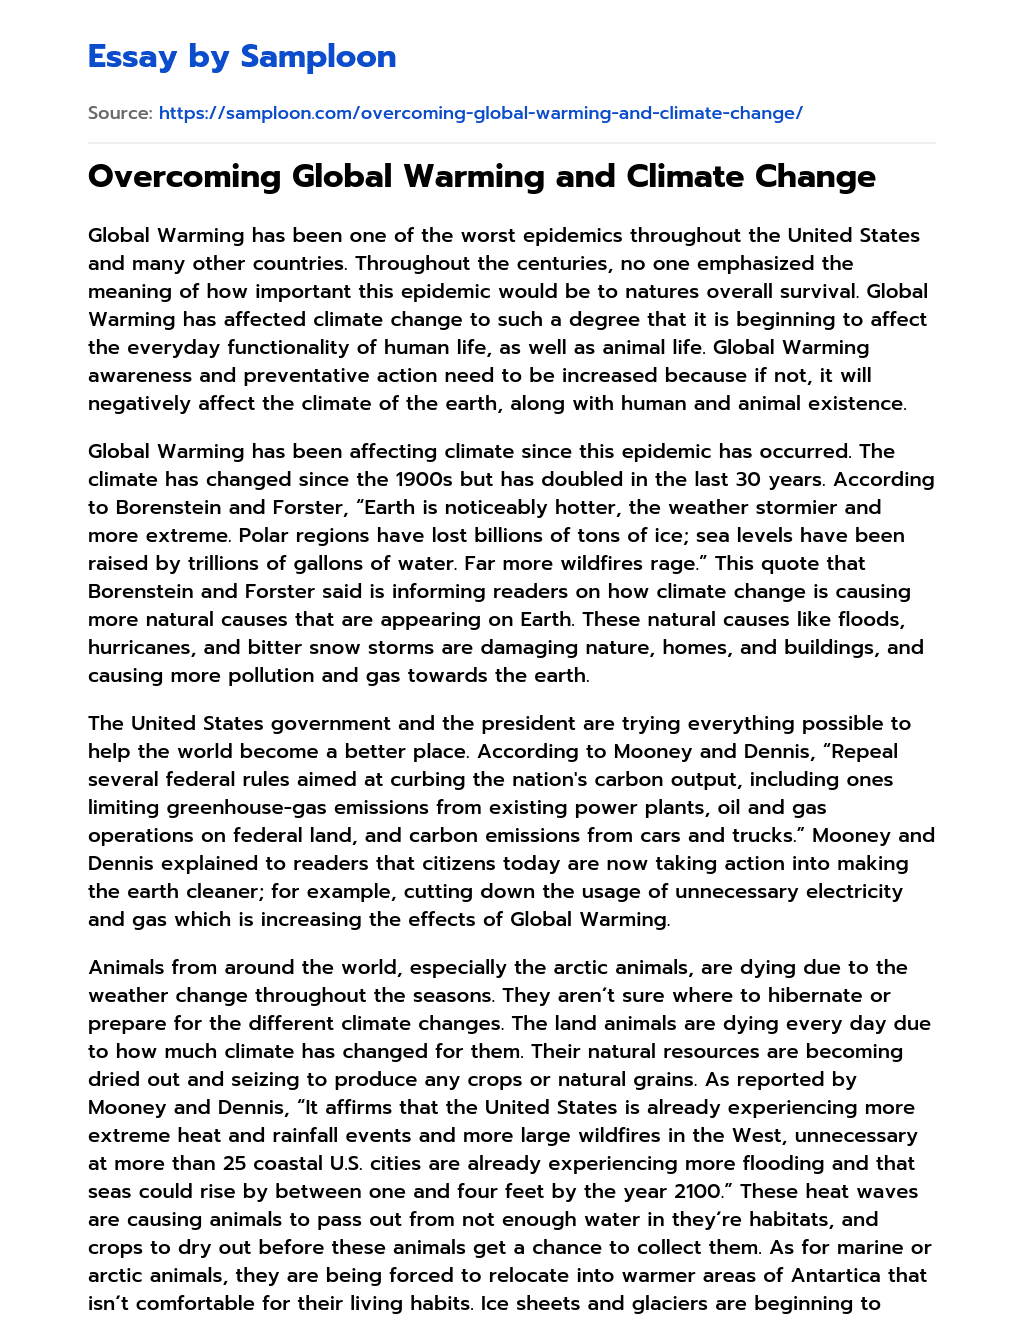 write an essay on global warming and climate change